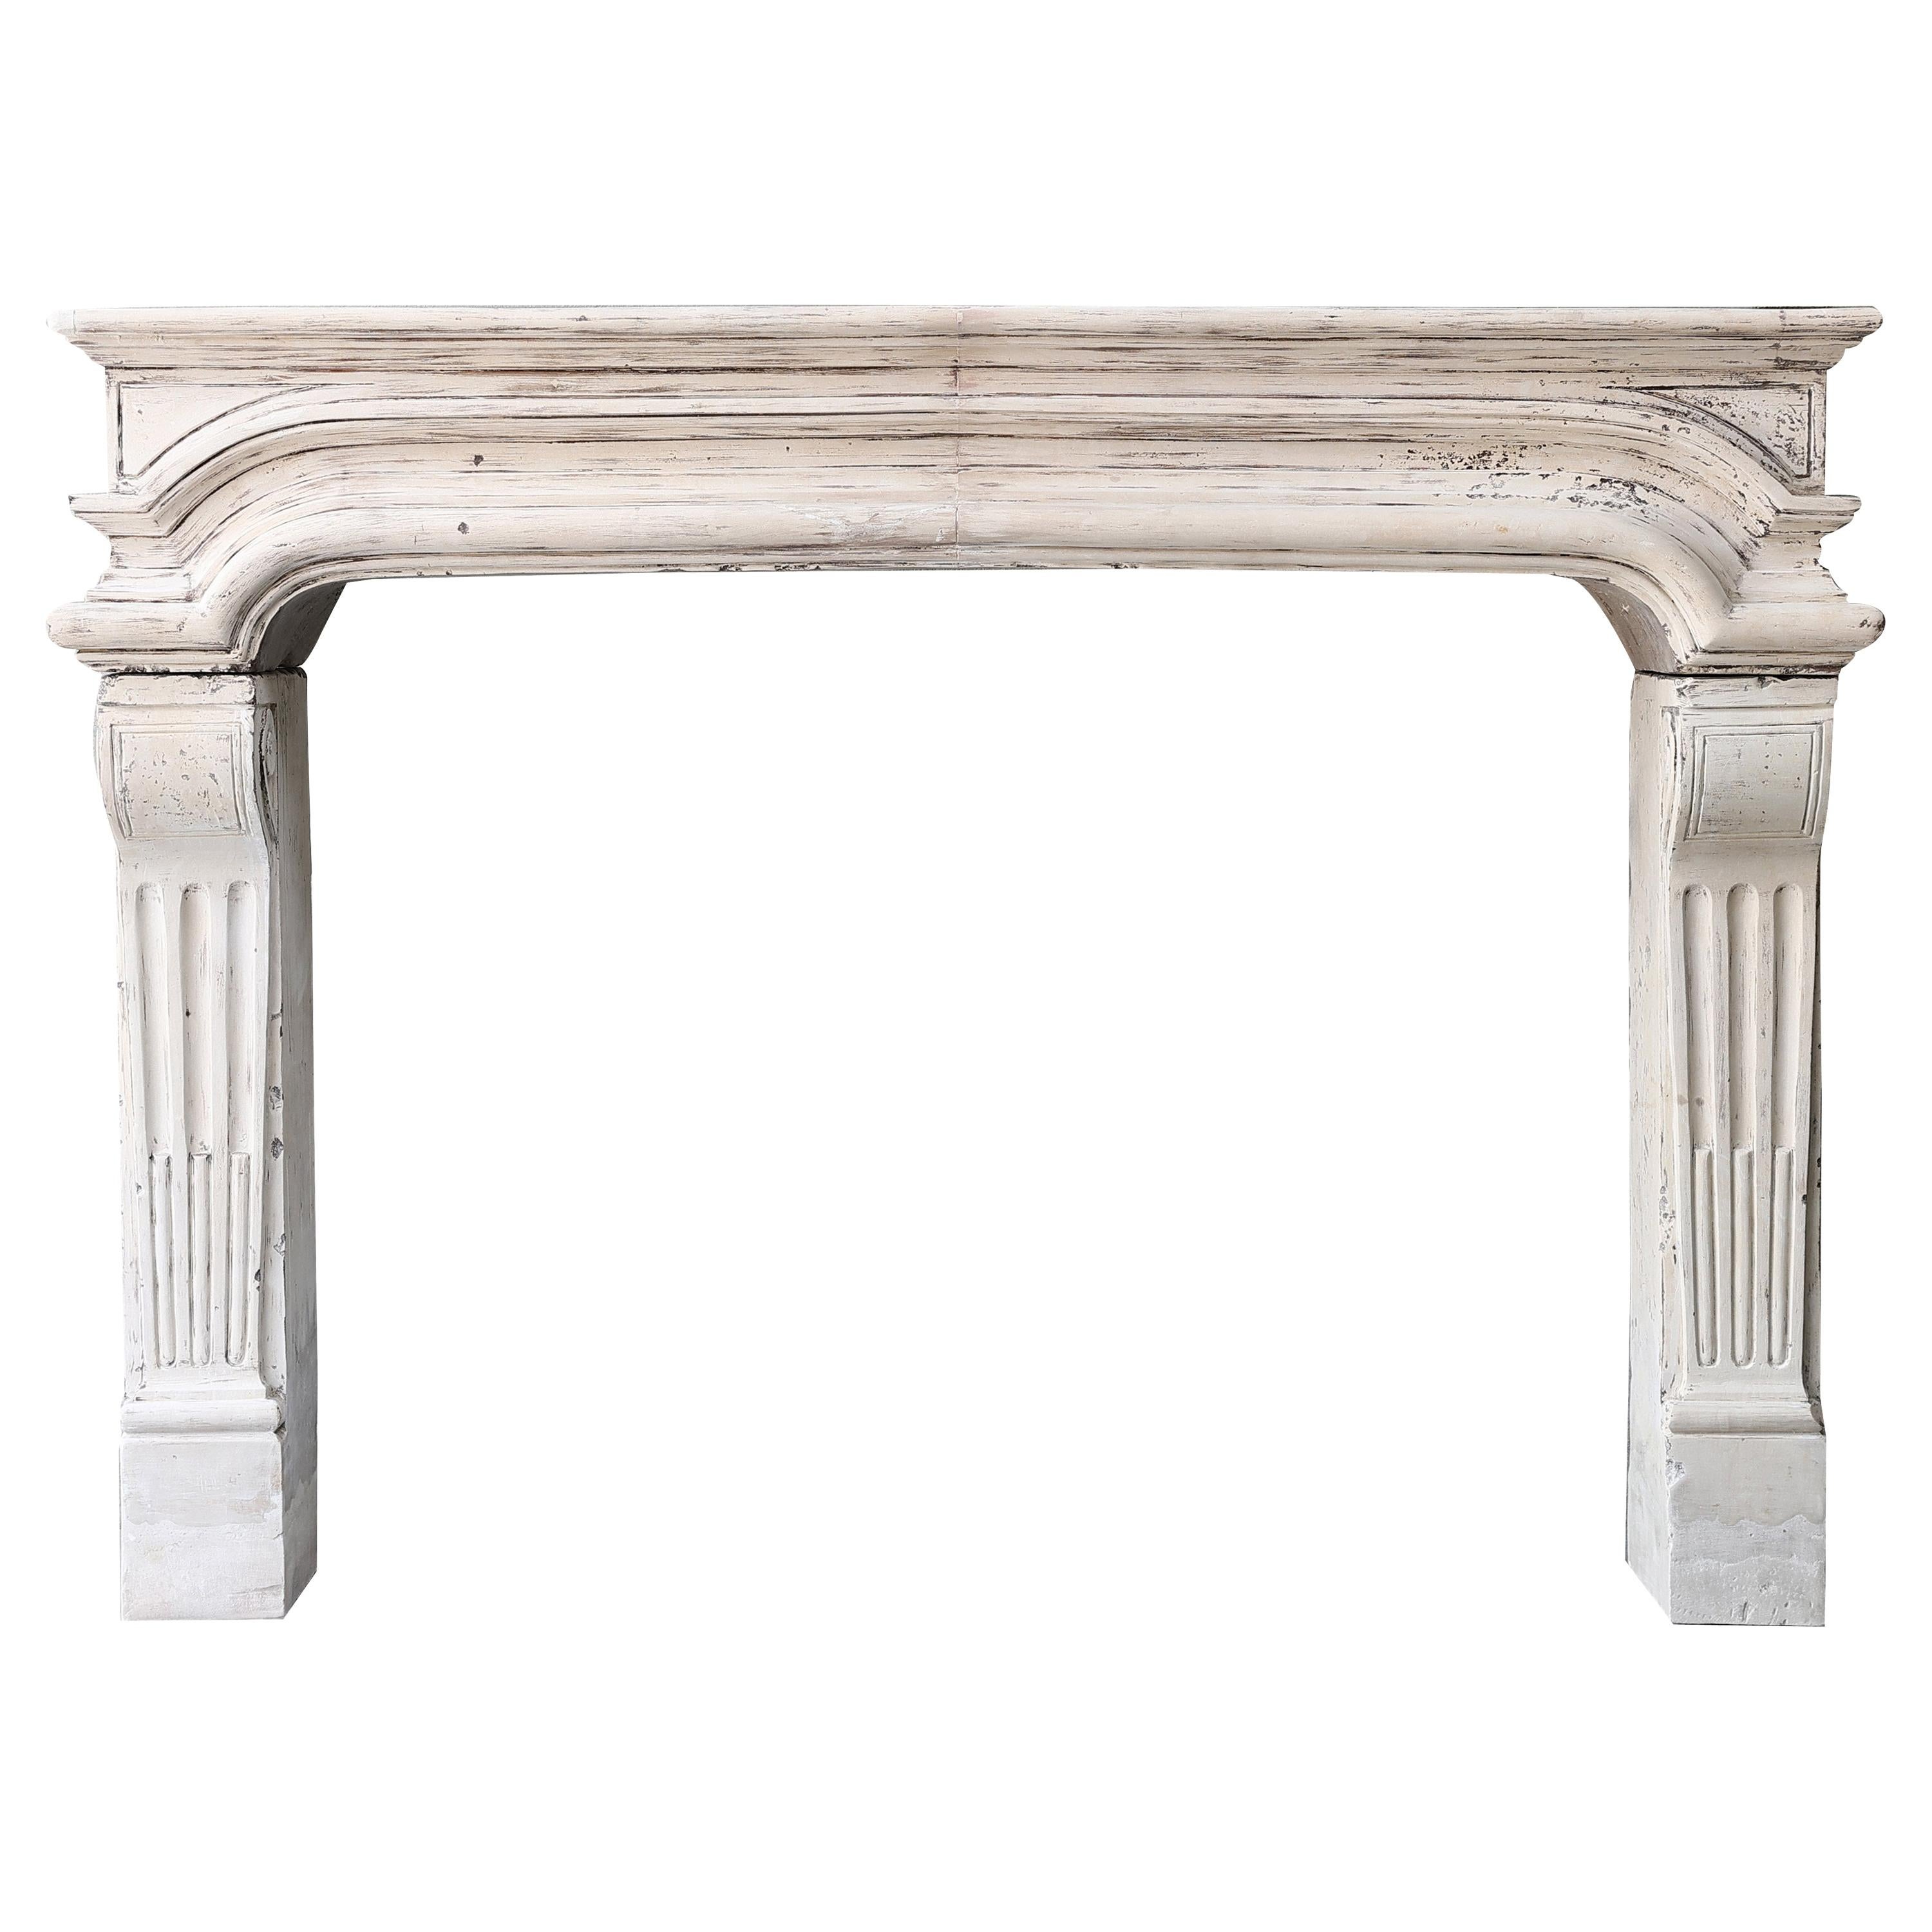 Beautifful 19th Century Fireplace of French Limestone in Style of Louis XIV